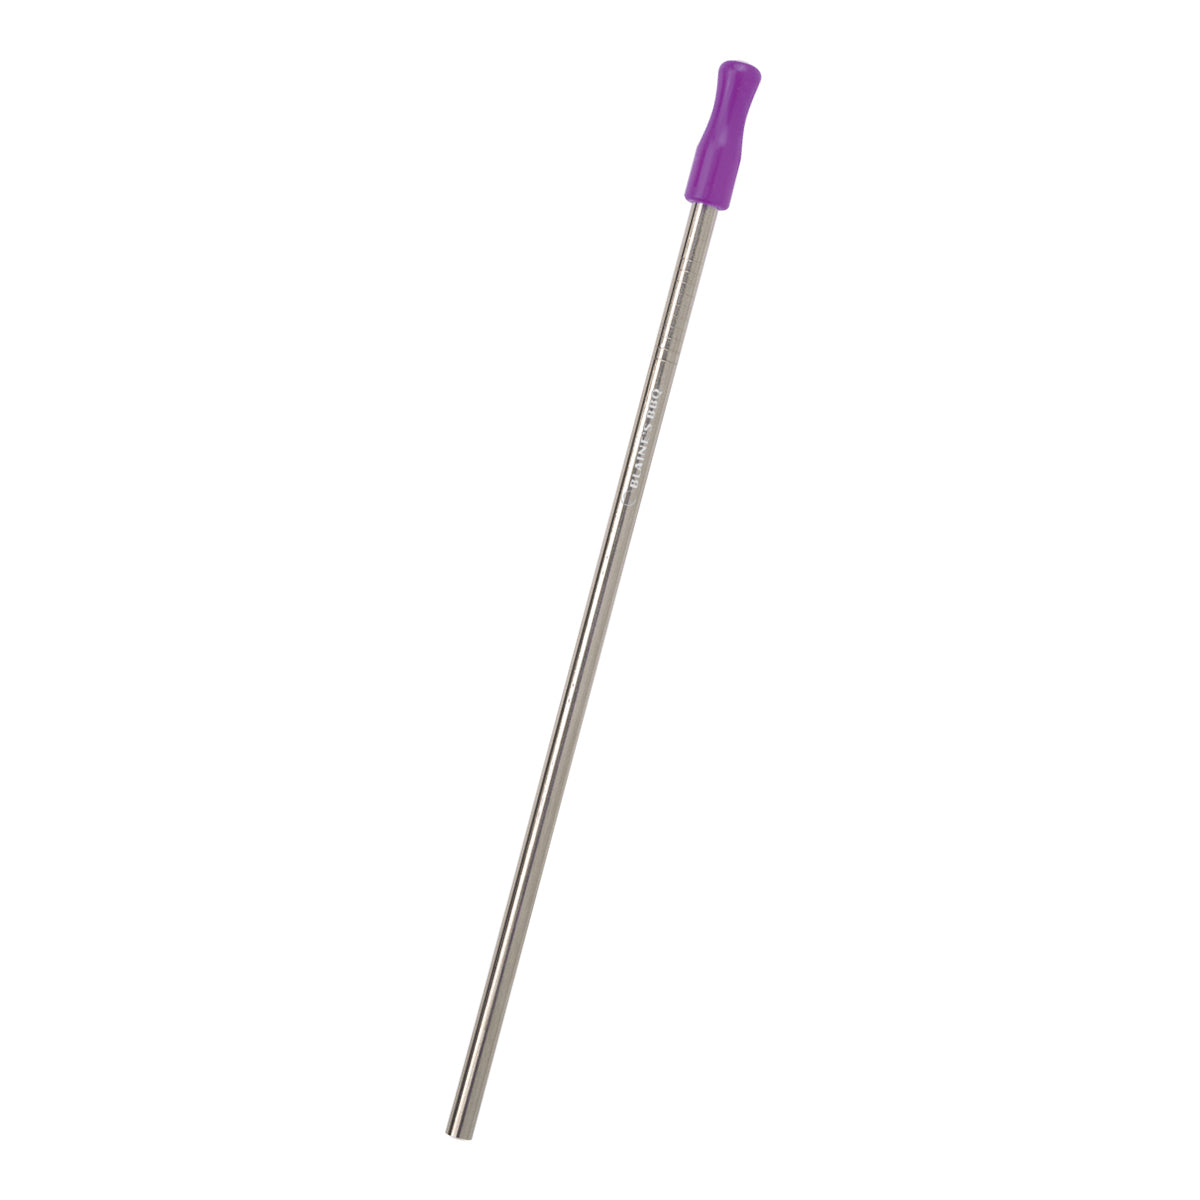 Customizable Stainless Steel Straw Kit with Cotton Pouch in purple.